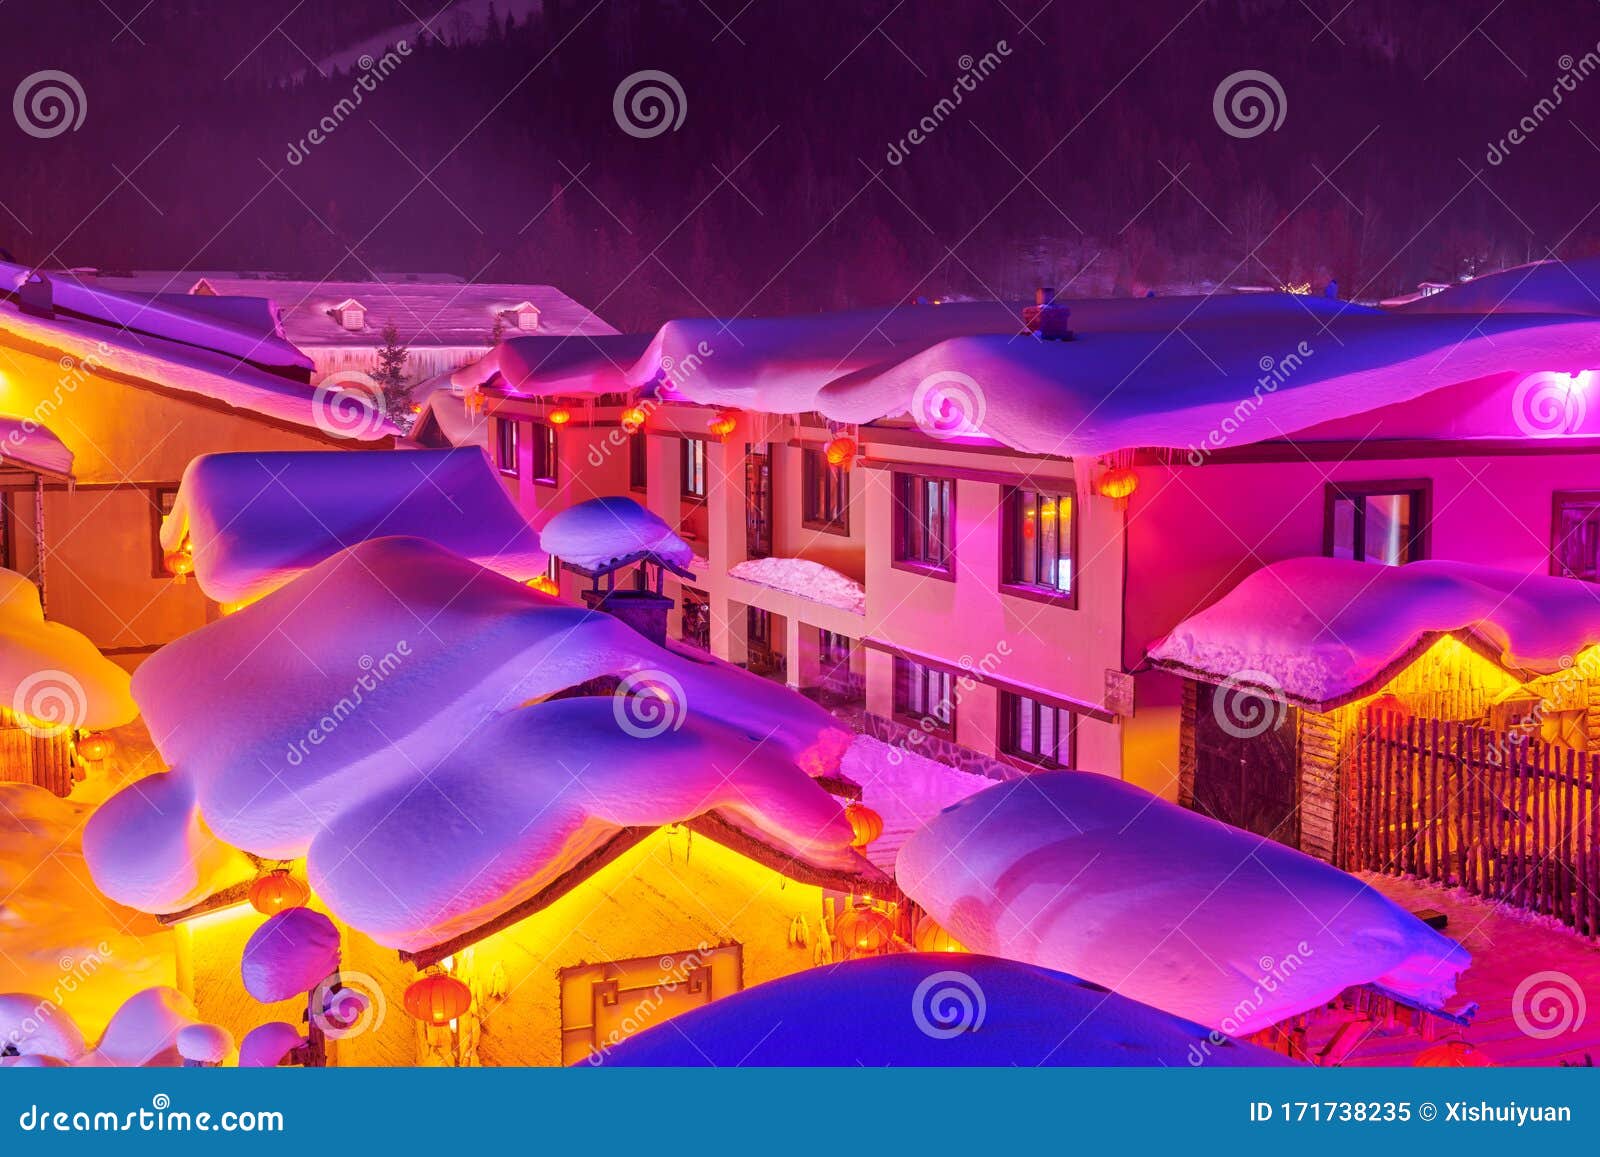 the beautiful colors of snow in winter at night